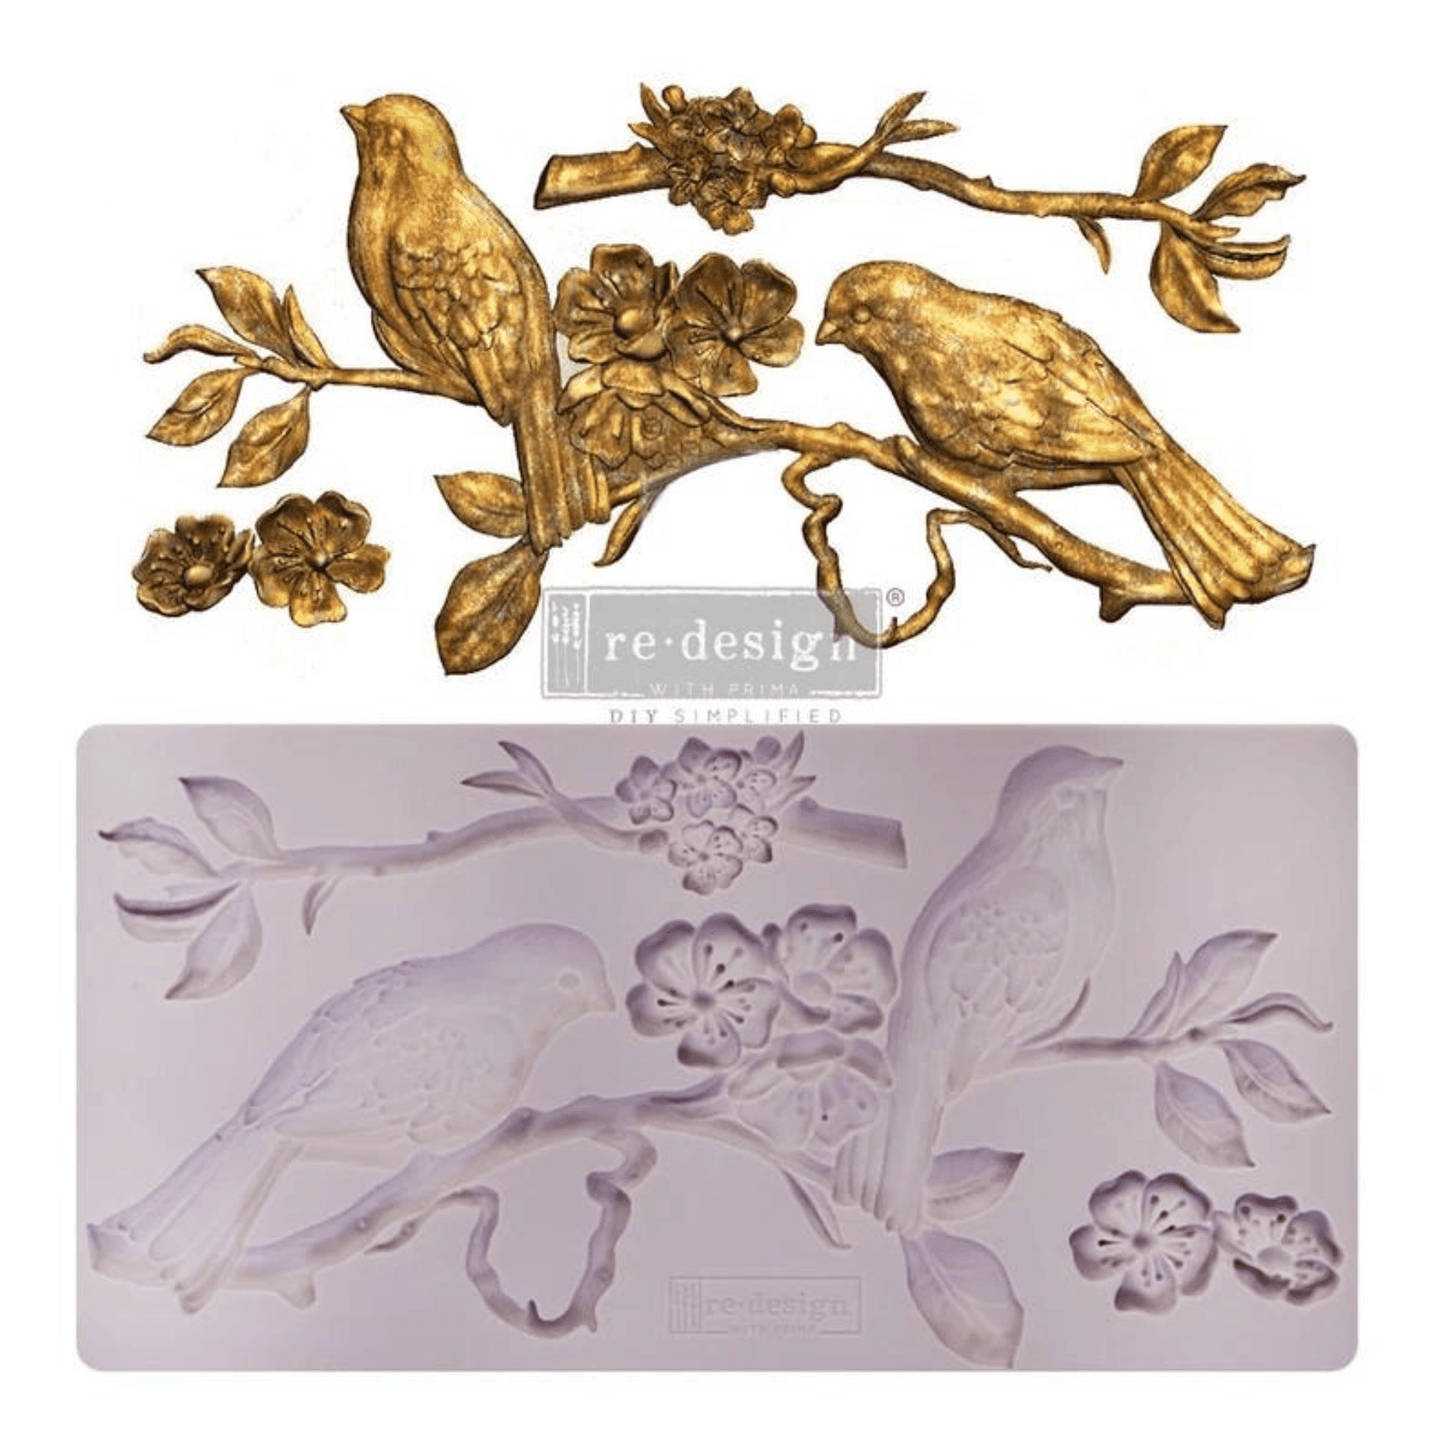 Blossoming Spring ReDesign With Prima Decor Mould - Same Day Shipping - Furniture Moulds - Candy Mold - Molds for Resin - Clay Mold - belleandbeau850